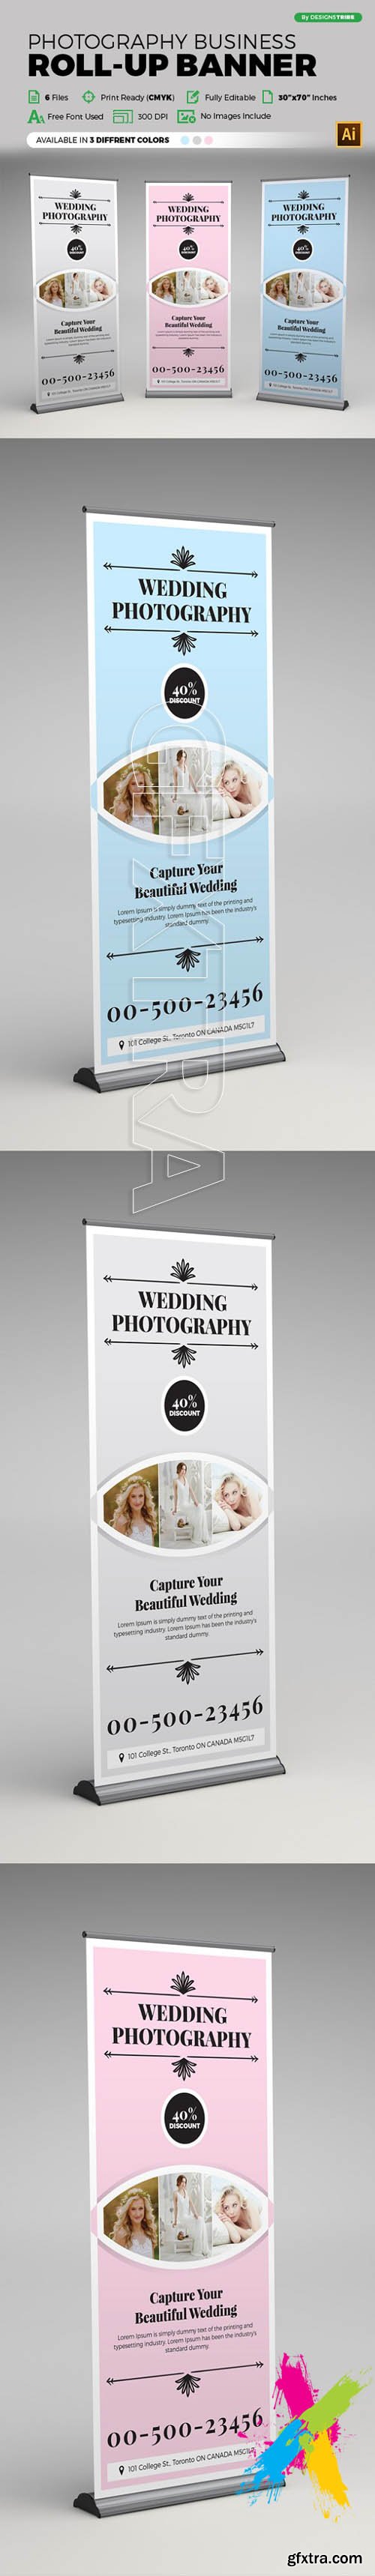 CM - Photography Roll Up Banner 1512921